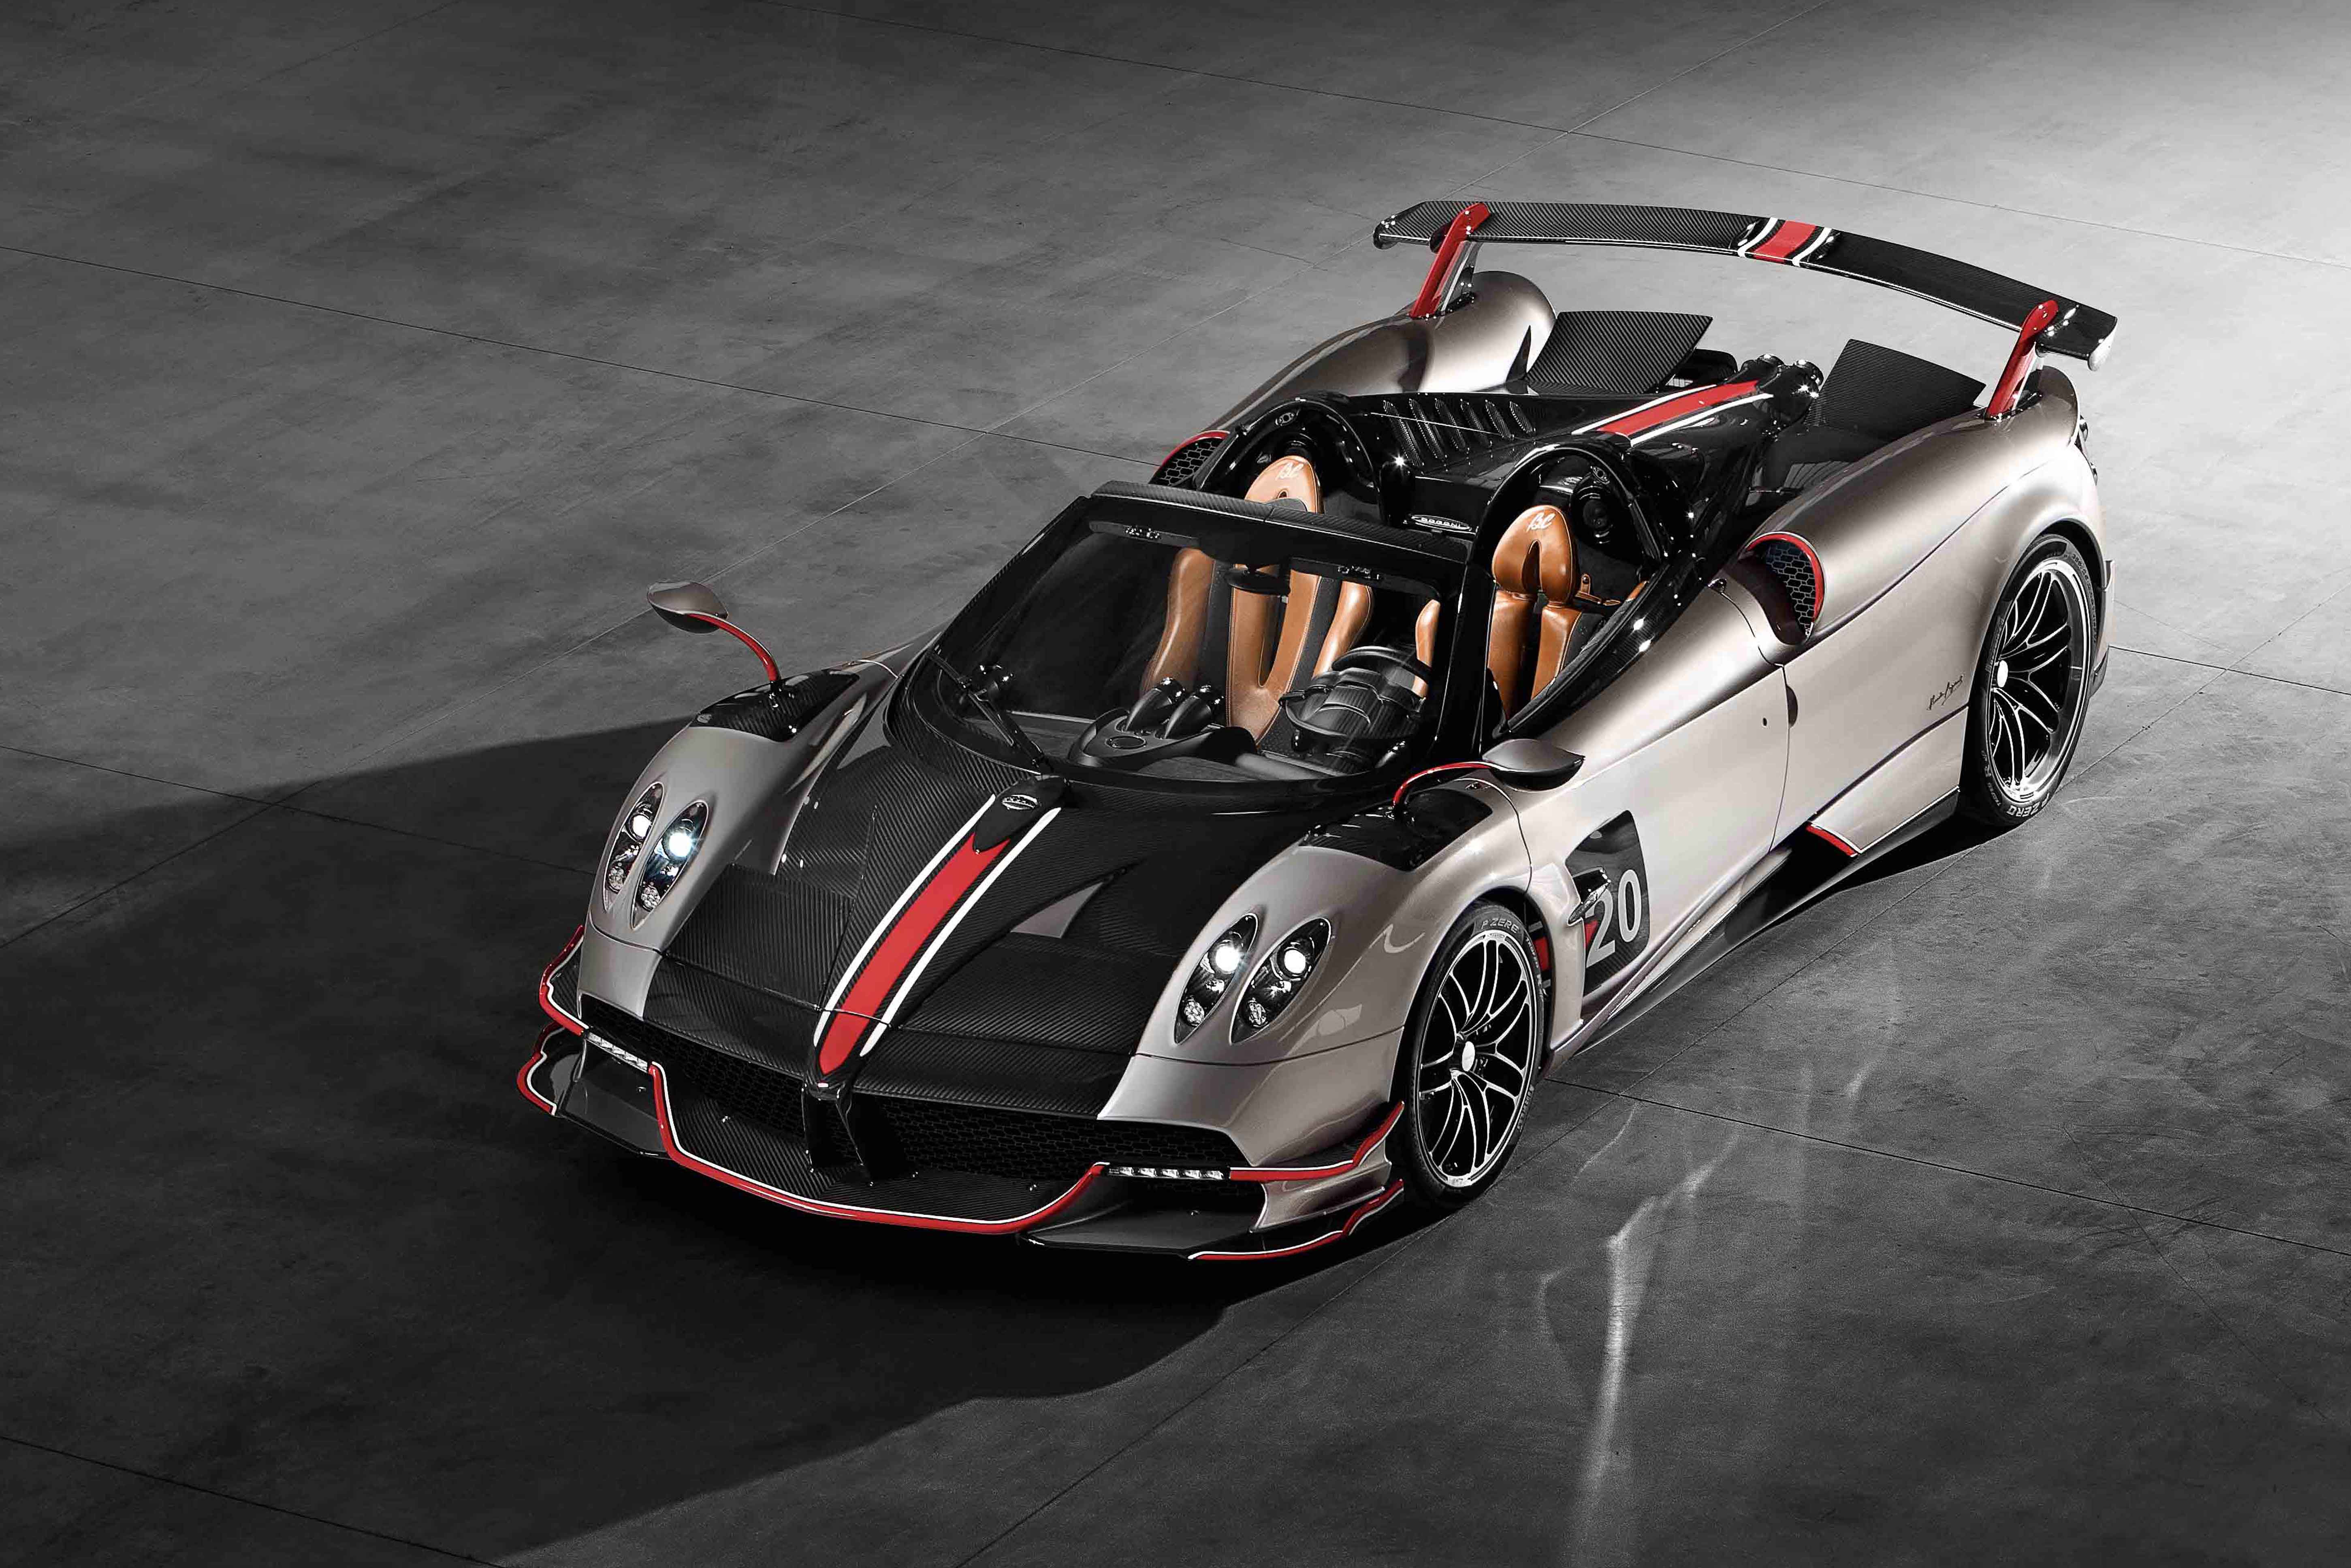 Pagani Automobili at the 2022 edition of MIMO with the Huayra R on the  racetrack & the one-off Huayra NC